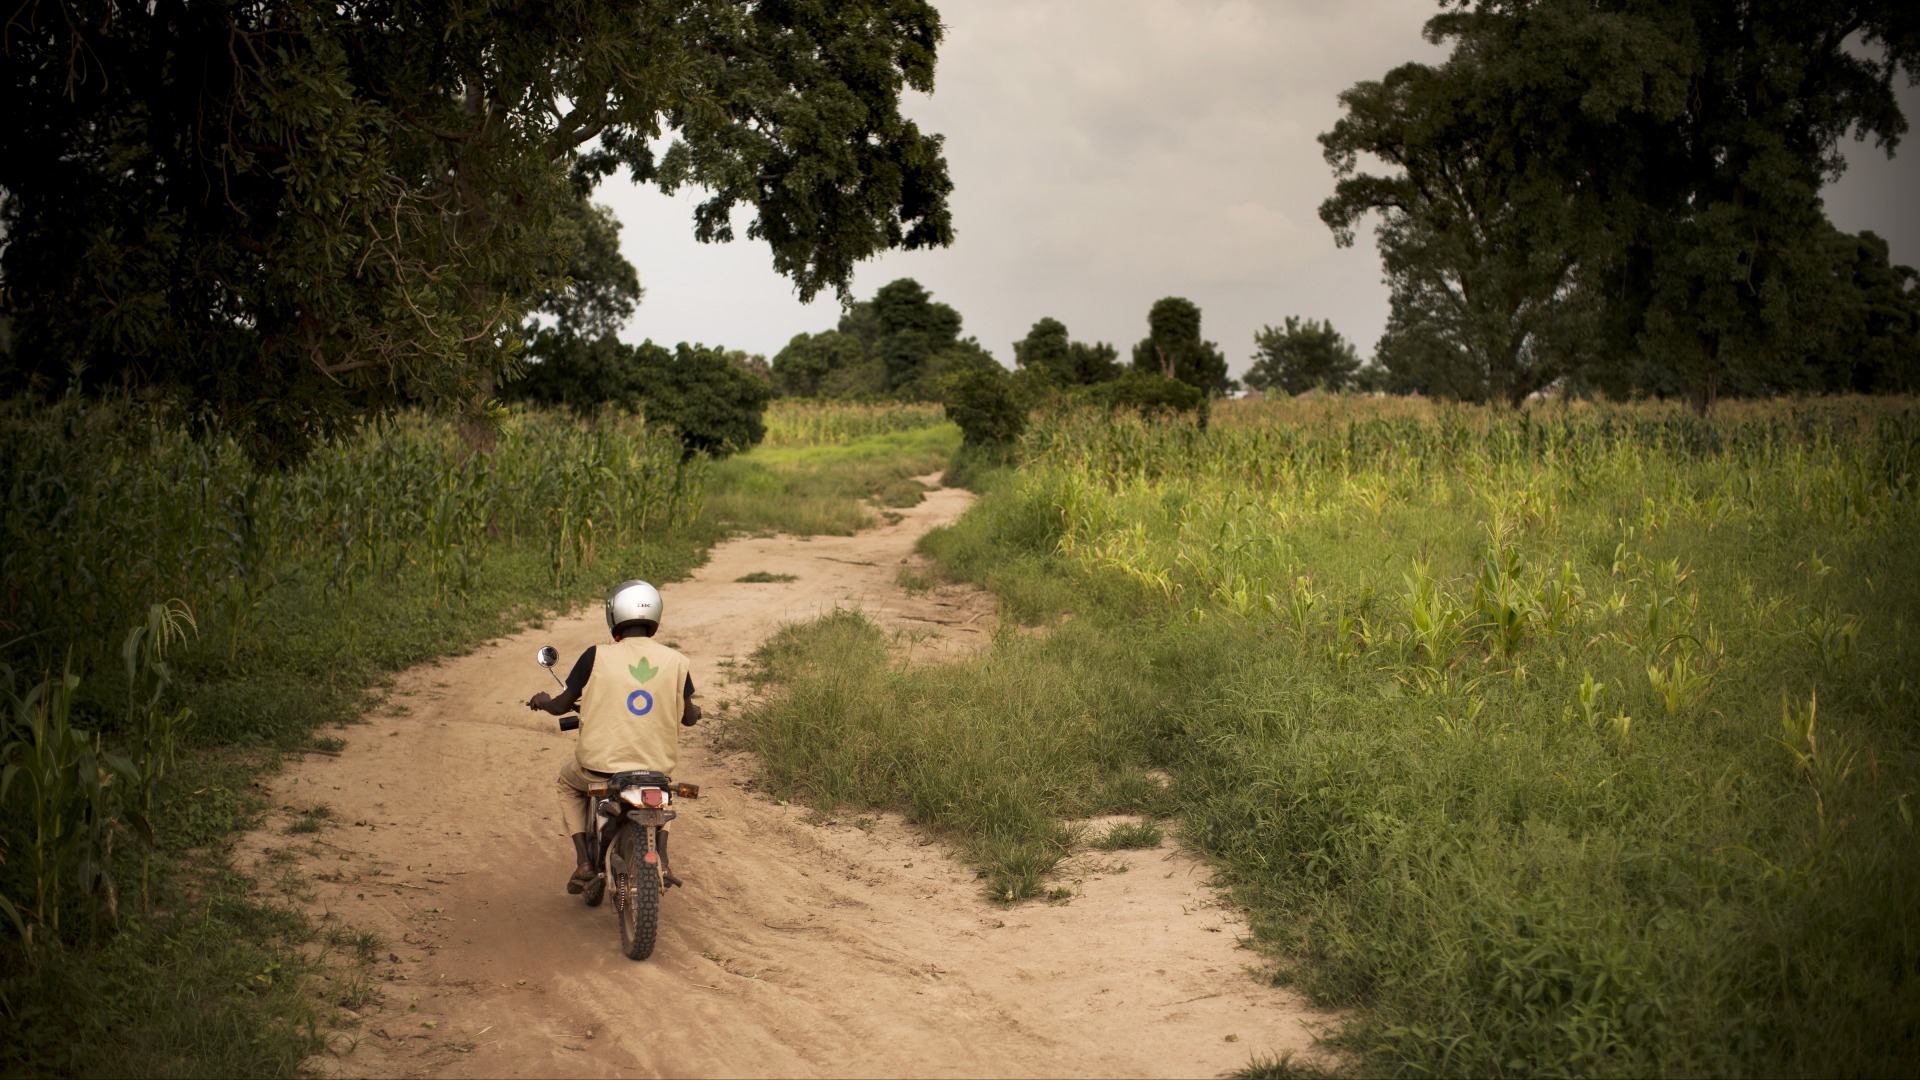 An Action Against Hunger aid worker drives a motorbike down a dirt road in Mali